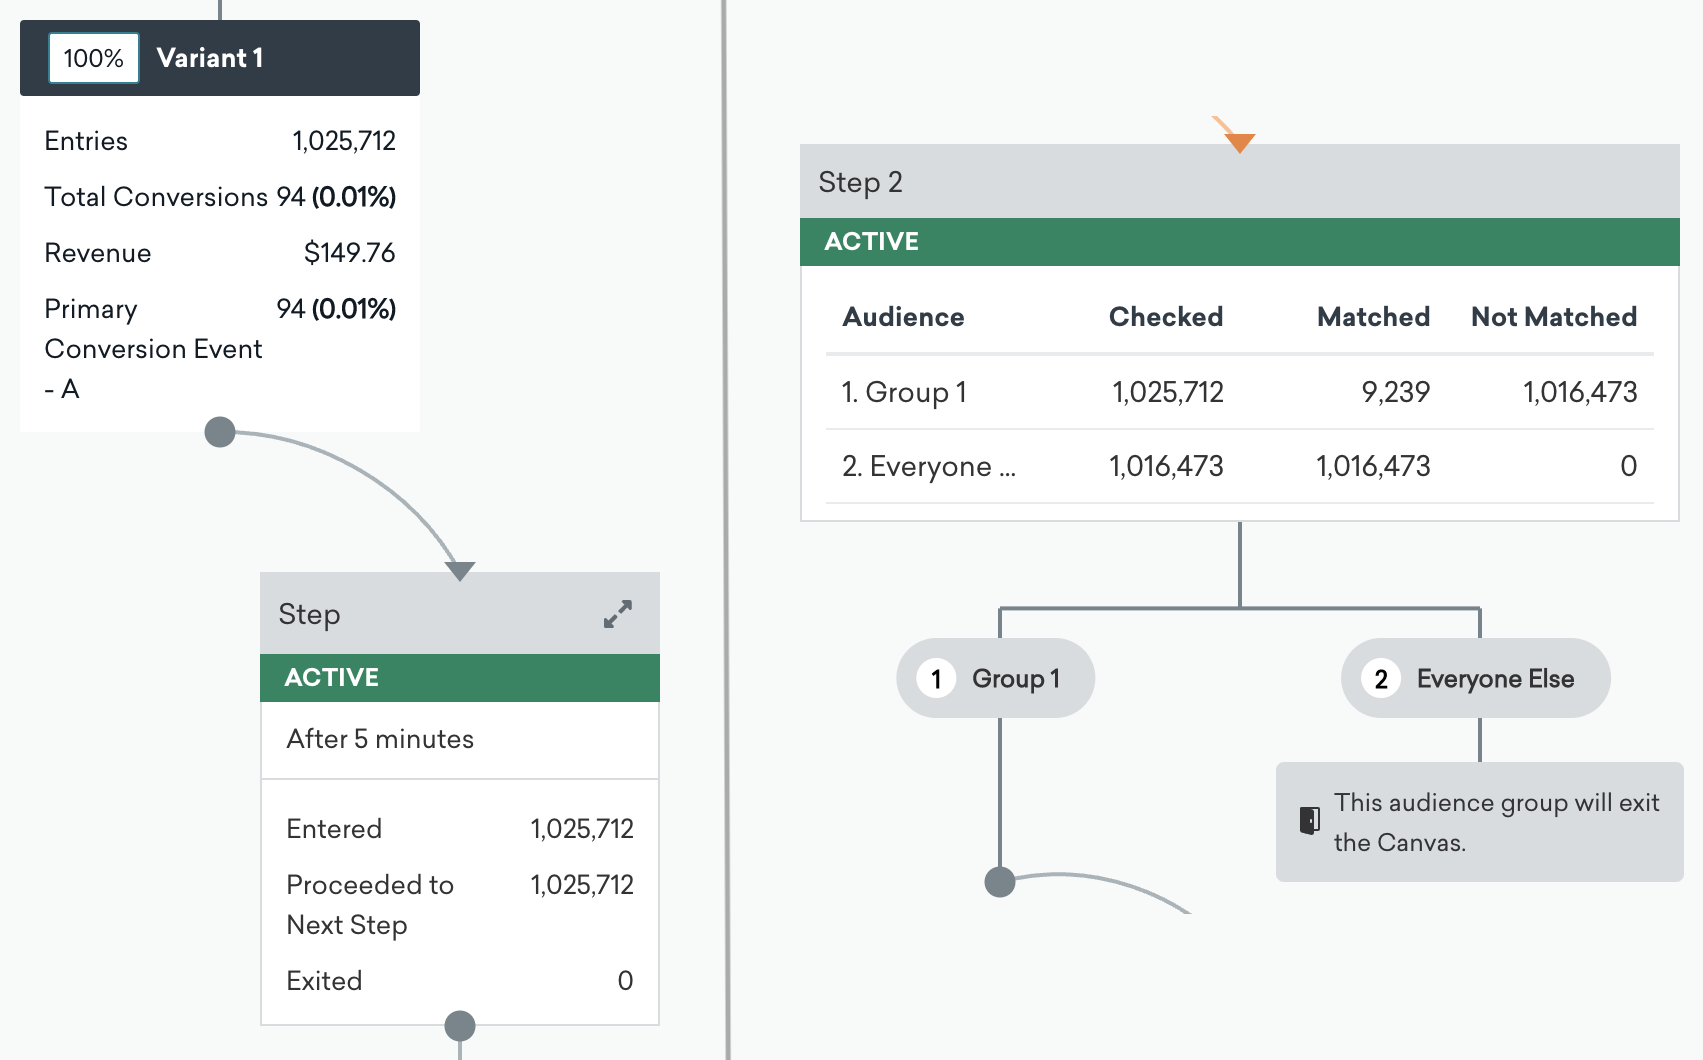 Two examples of performance details for Canvas components. On the left shows the performance details for a user path with one Canvas component. On the right shows performance details for an expanded Canvas component and a nested step that shows the in-app message impression count.